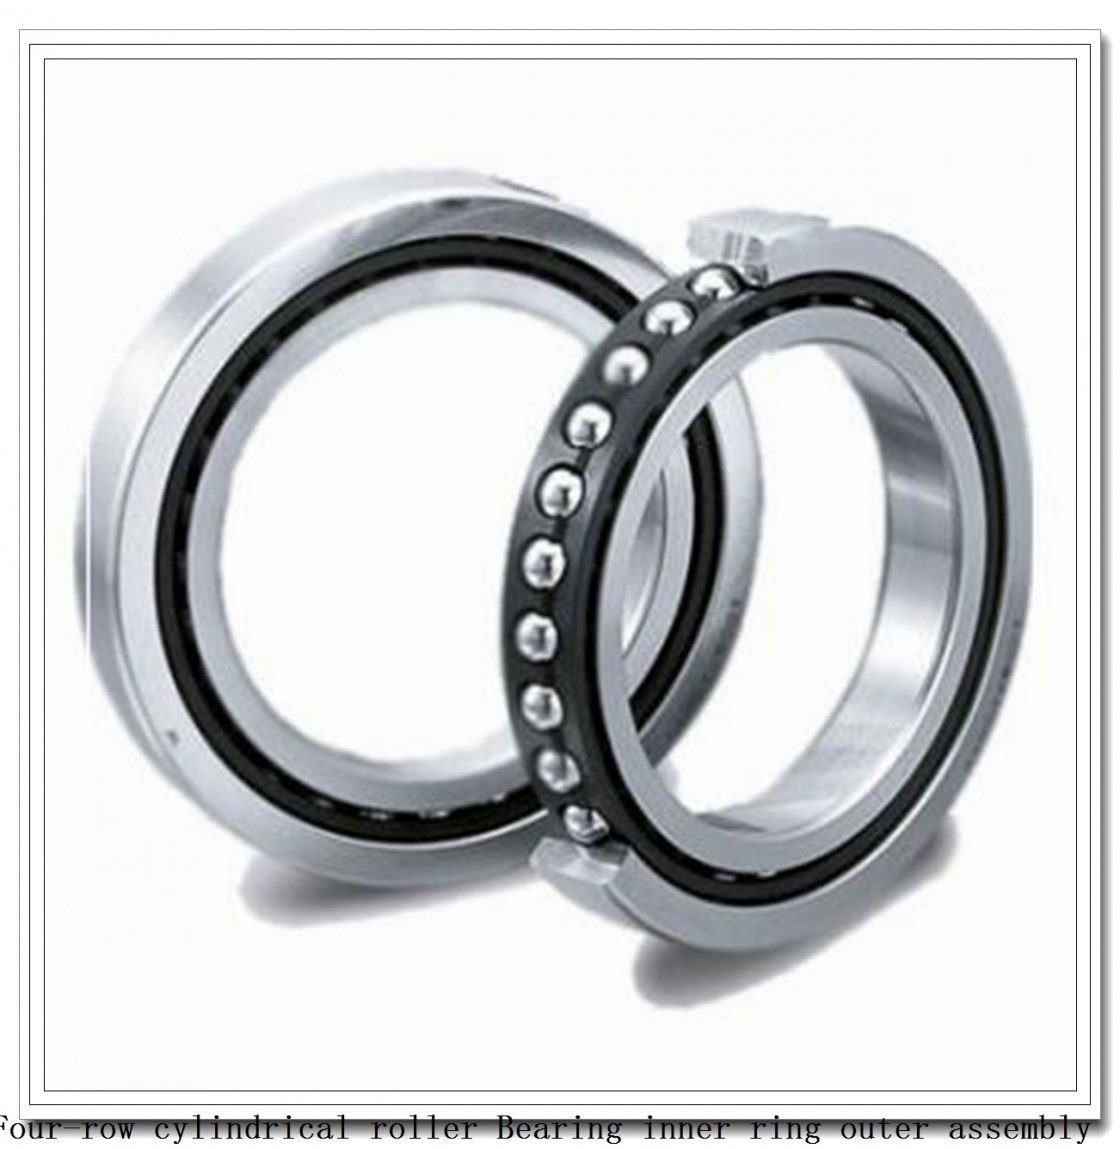 850arXs3304 928rXs3304 four-row cylindrical roller Bearing inner ring outer assembly